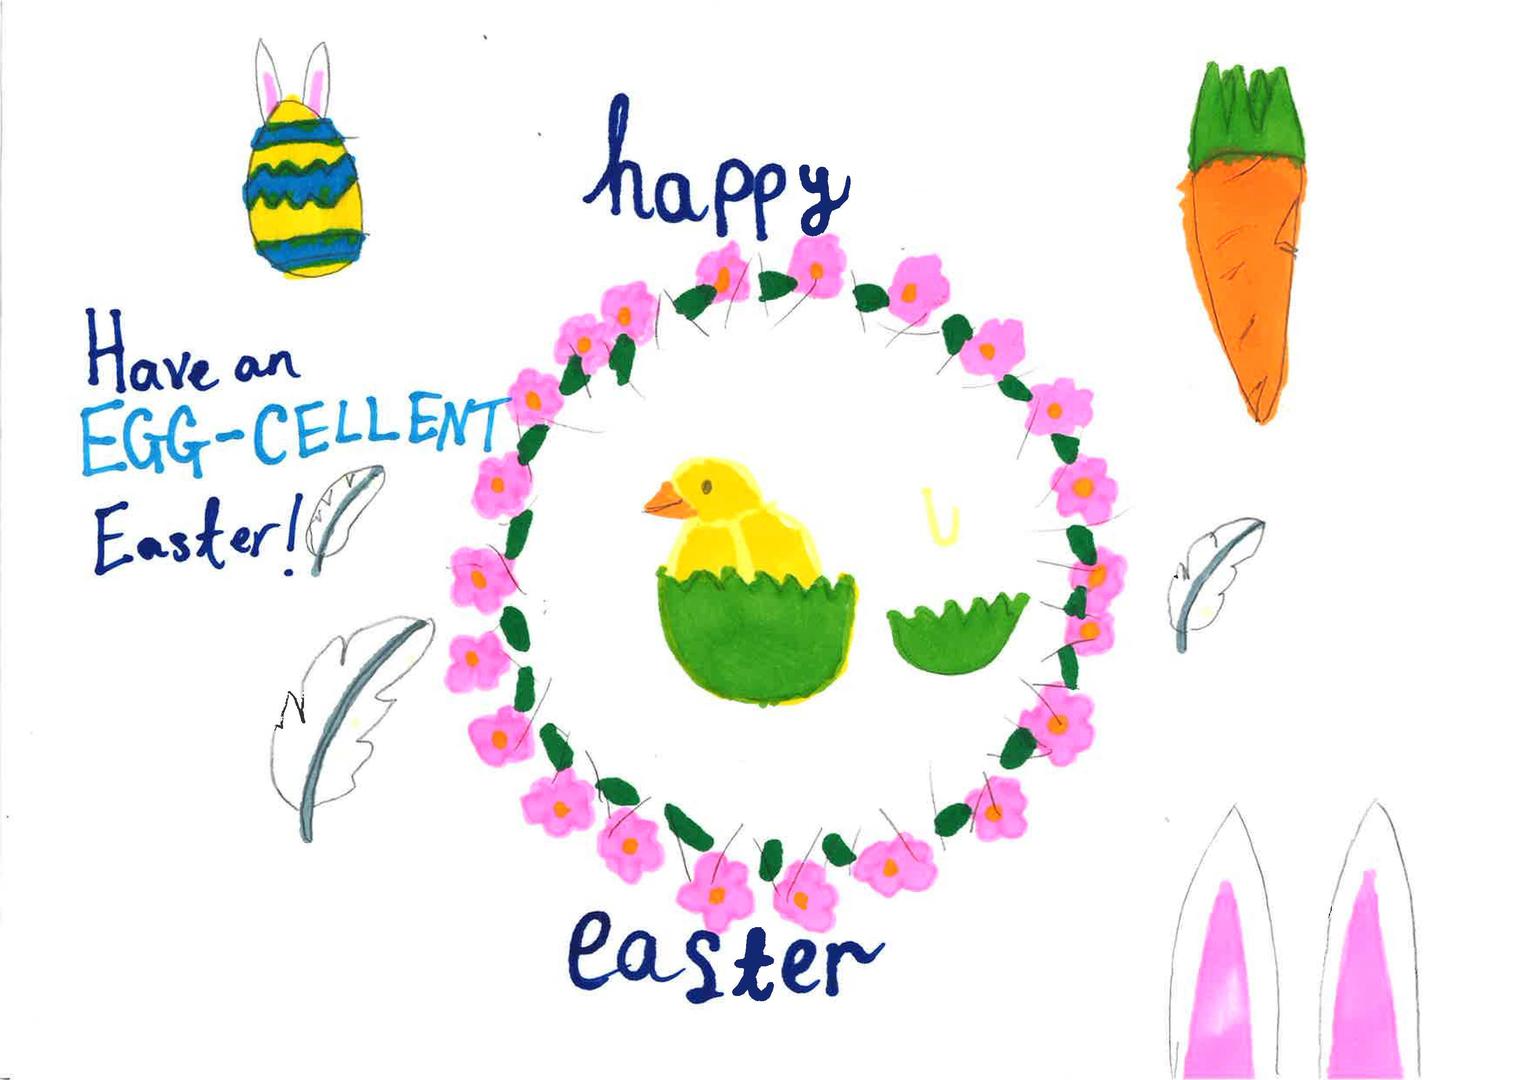 Easter card with chick hatching